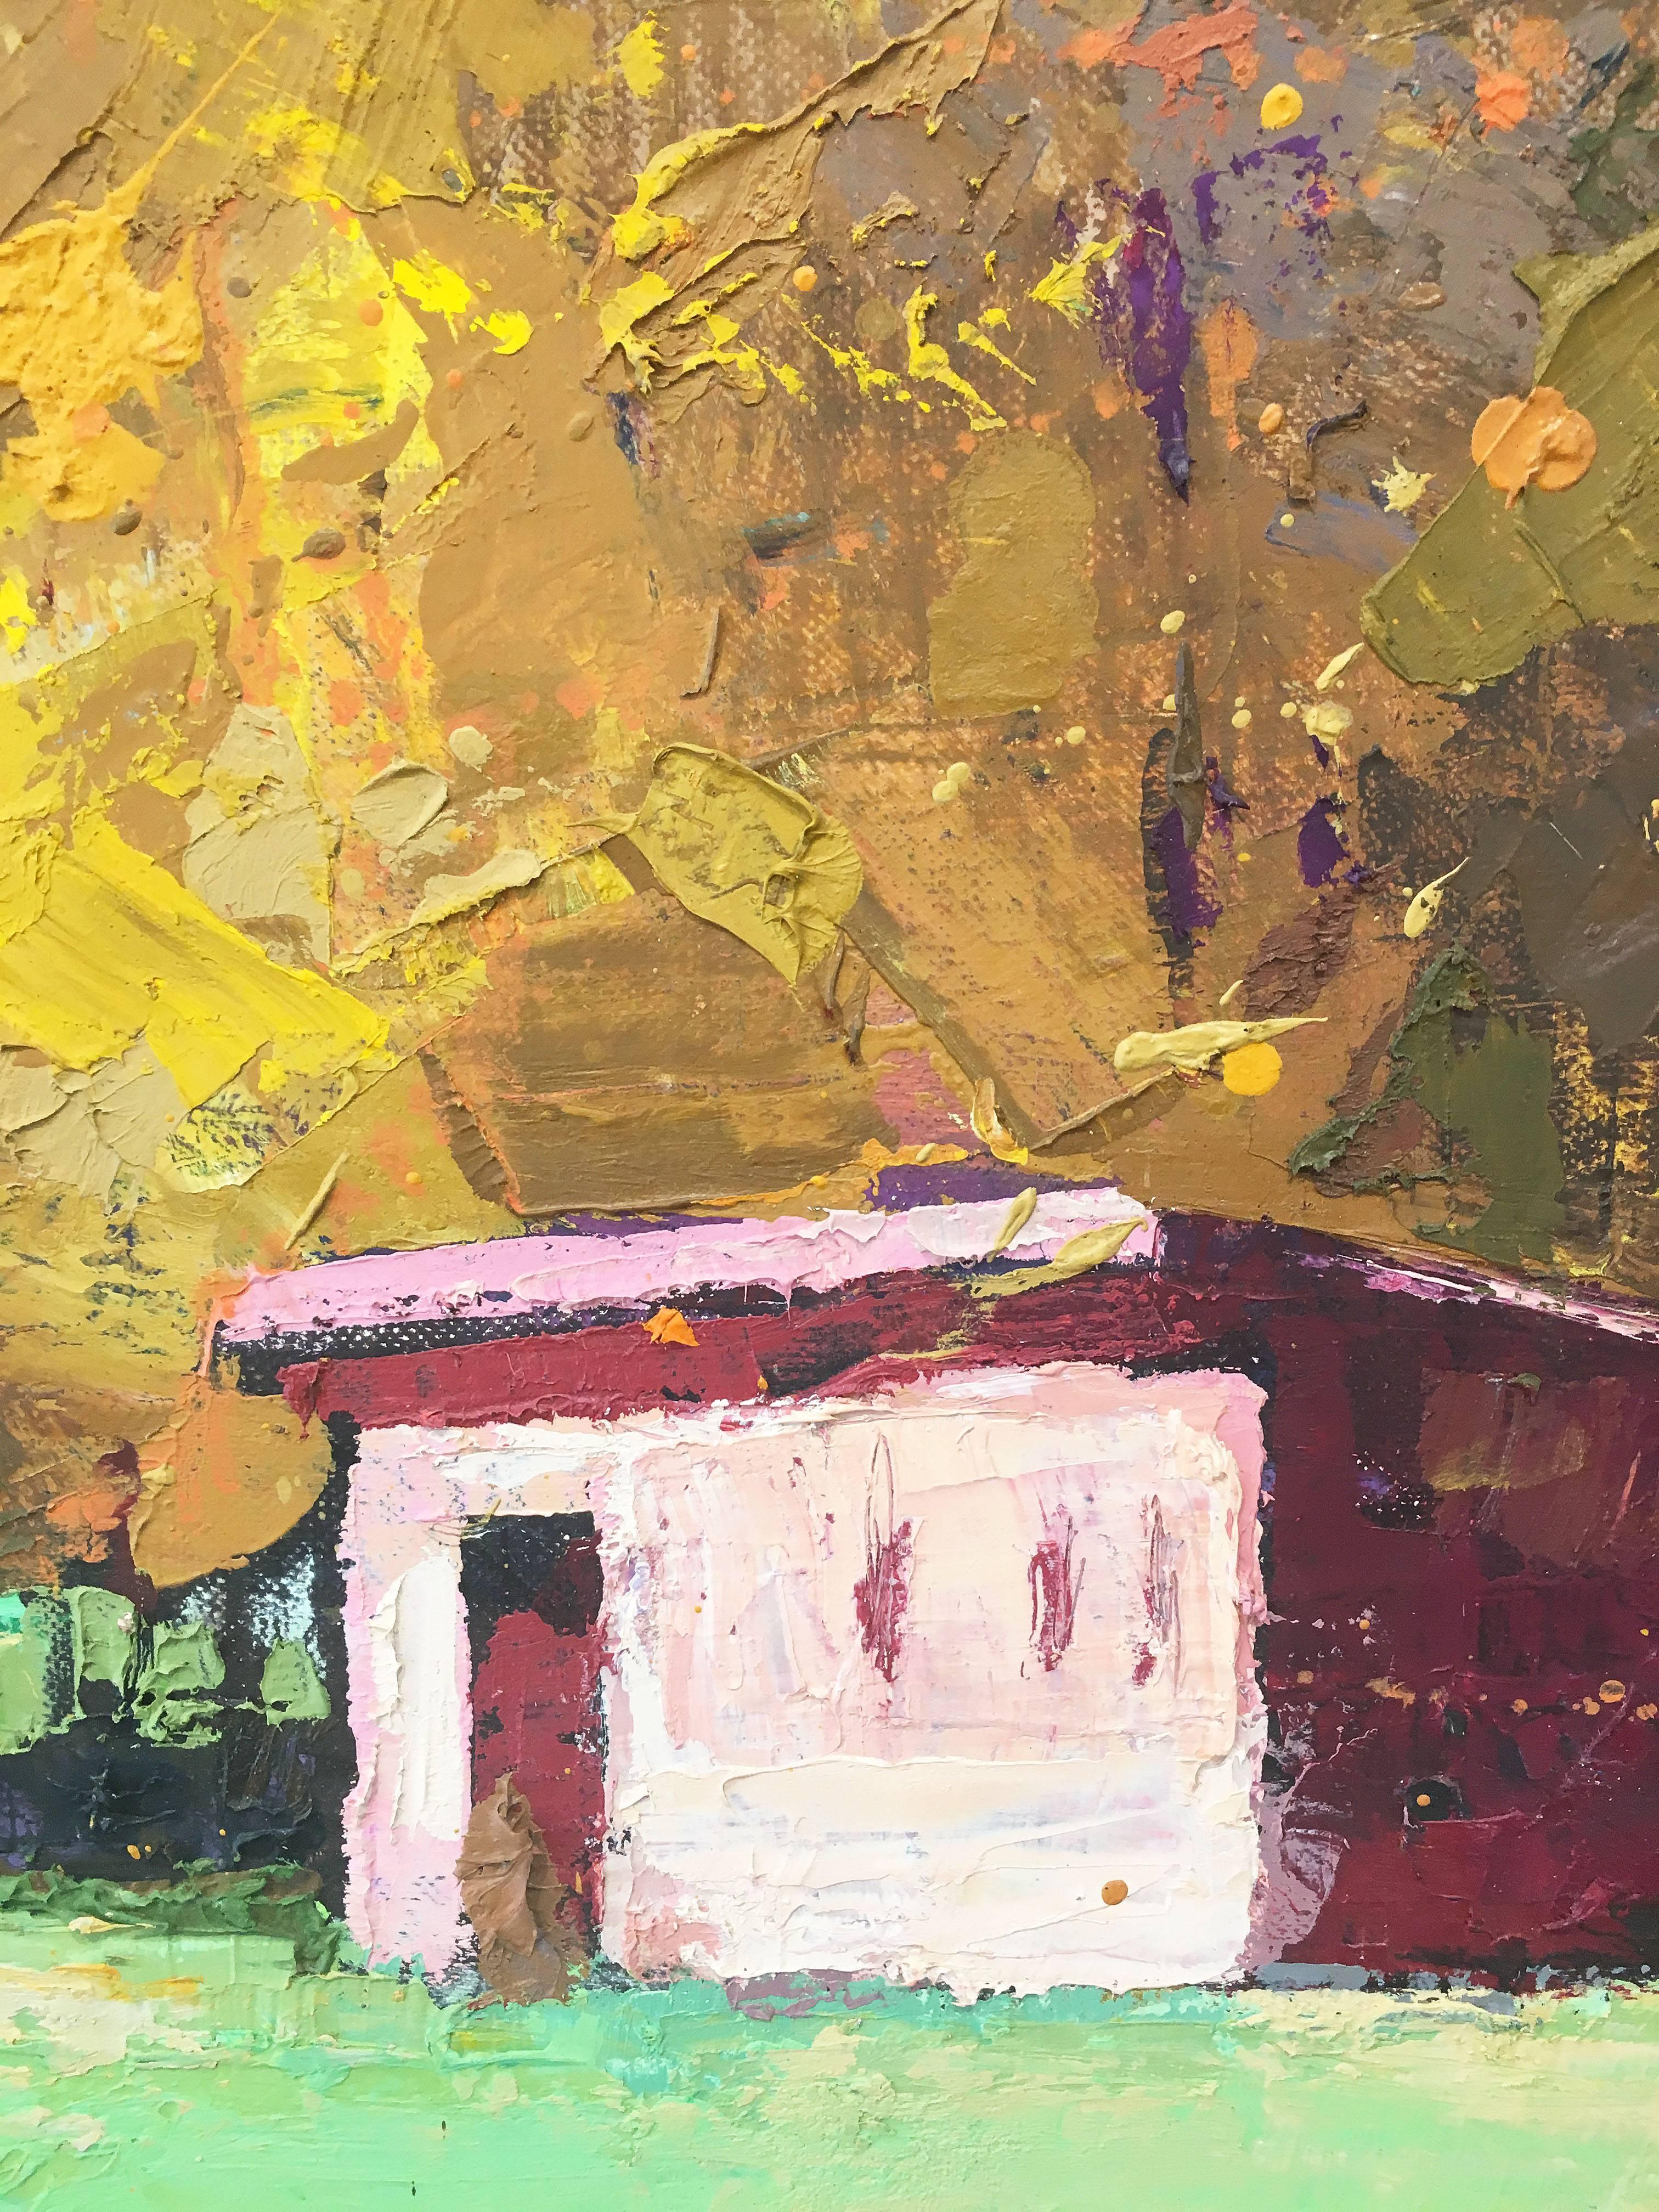 Impressionist Landscape painting of Autumn in the country by Contemporary American artist, Larry Horowitz in yellow, orange, pink, brown and green.

Larry Horowitz's work captures the beauty of the American landscape with an expert use of texture